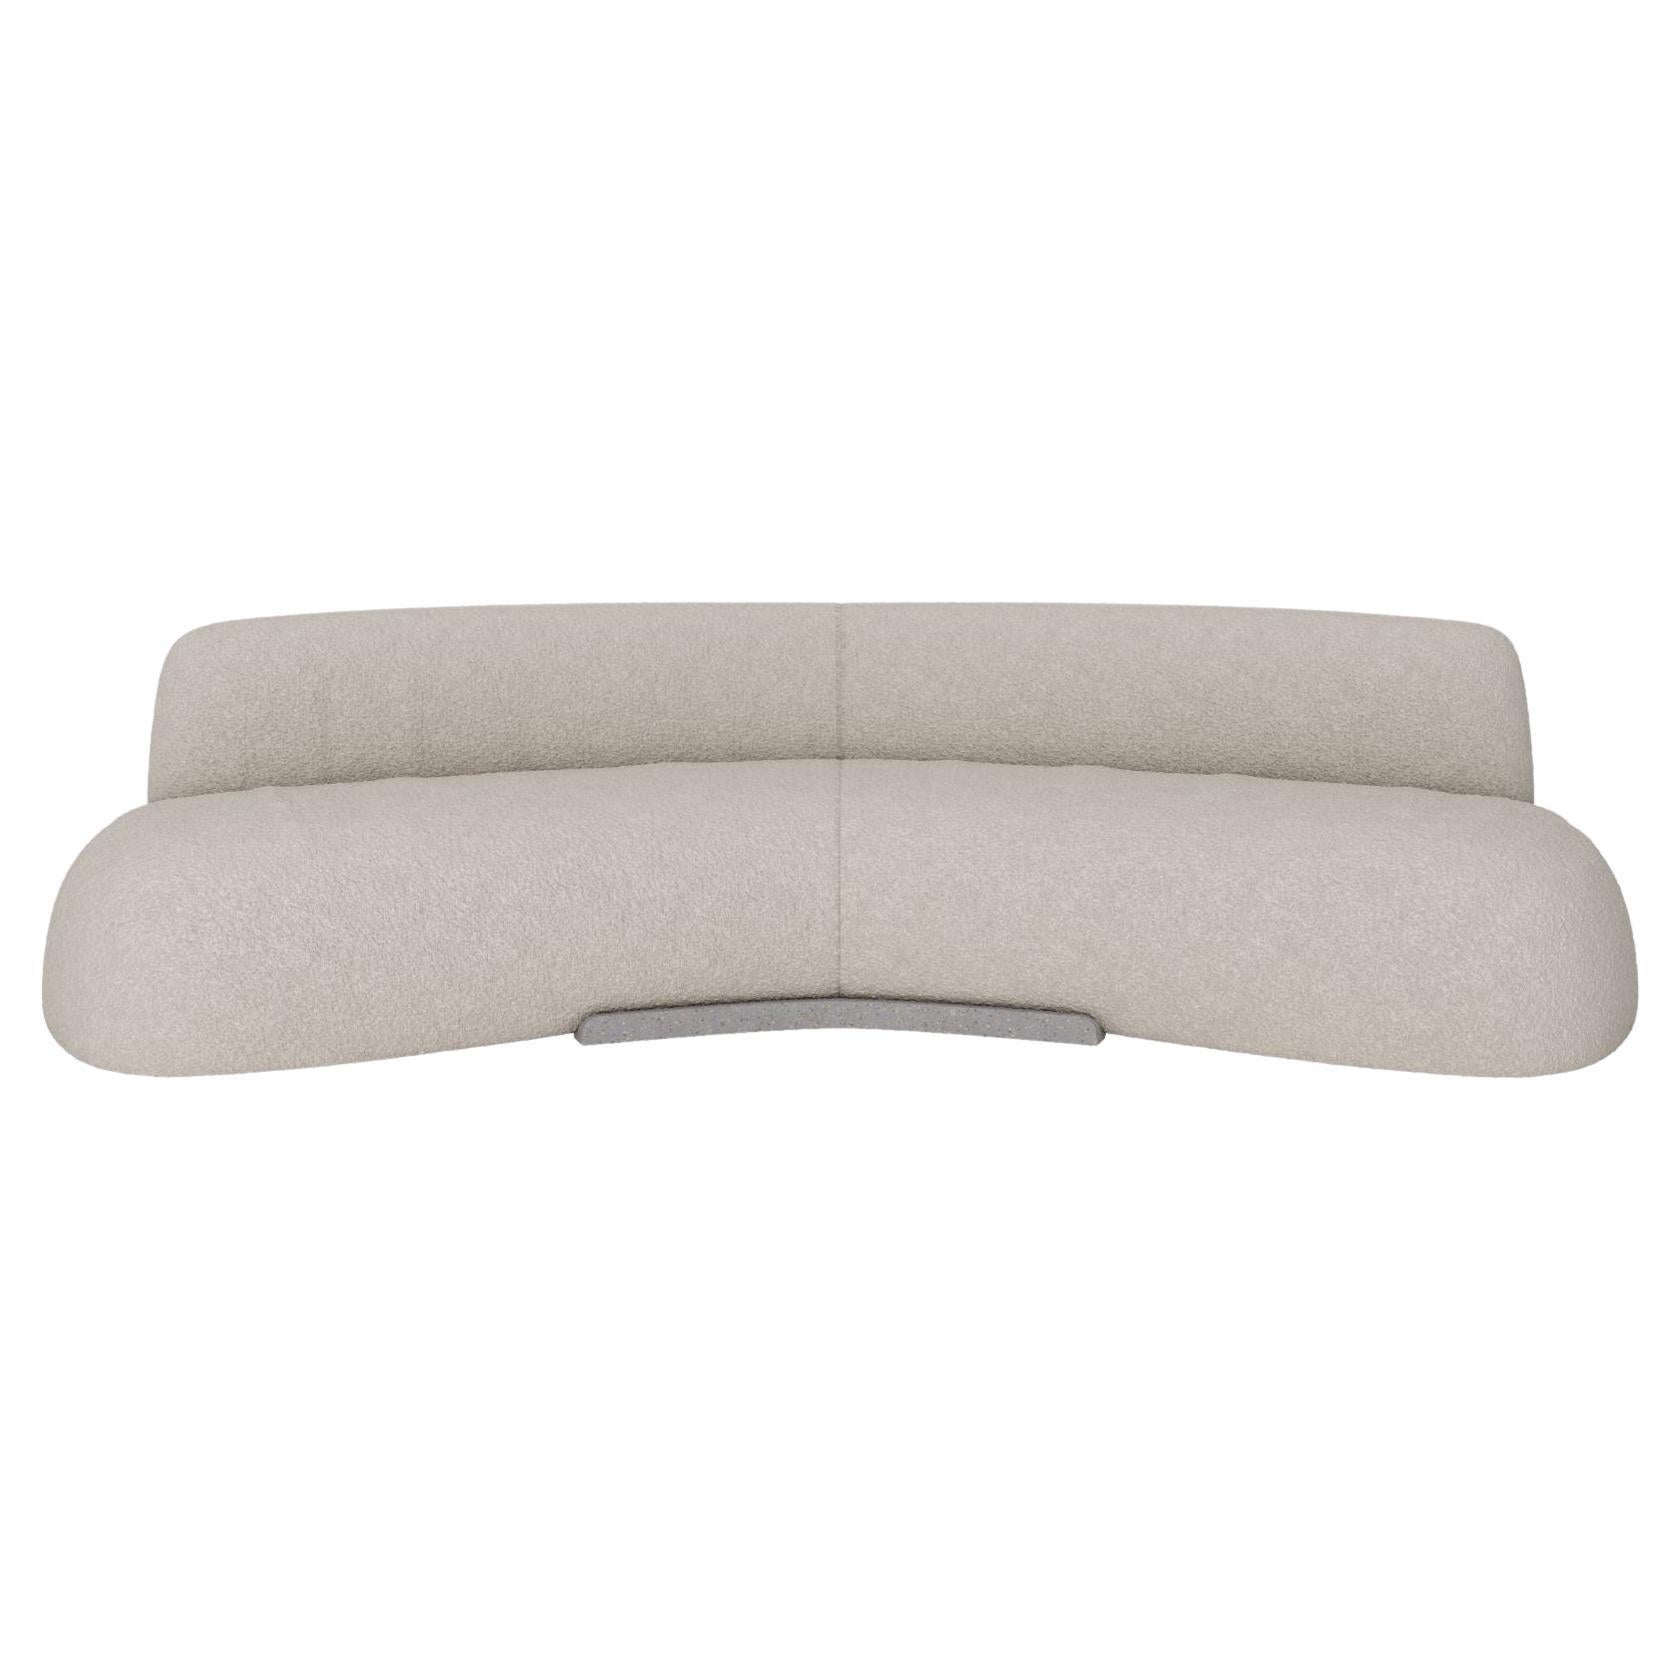 White Fabric Sima Sofa by Andrea Steidl for Delvis Unlimited For Sale